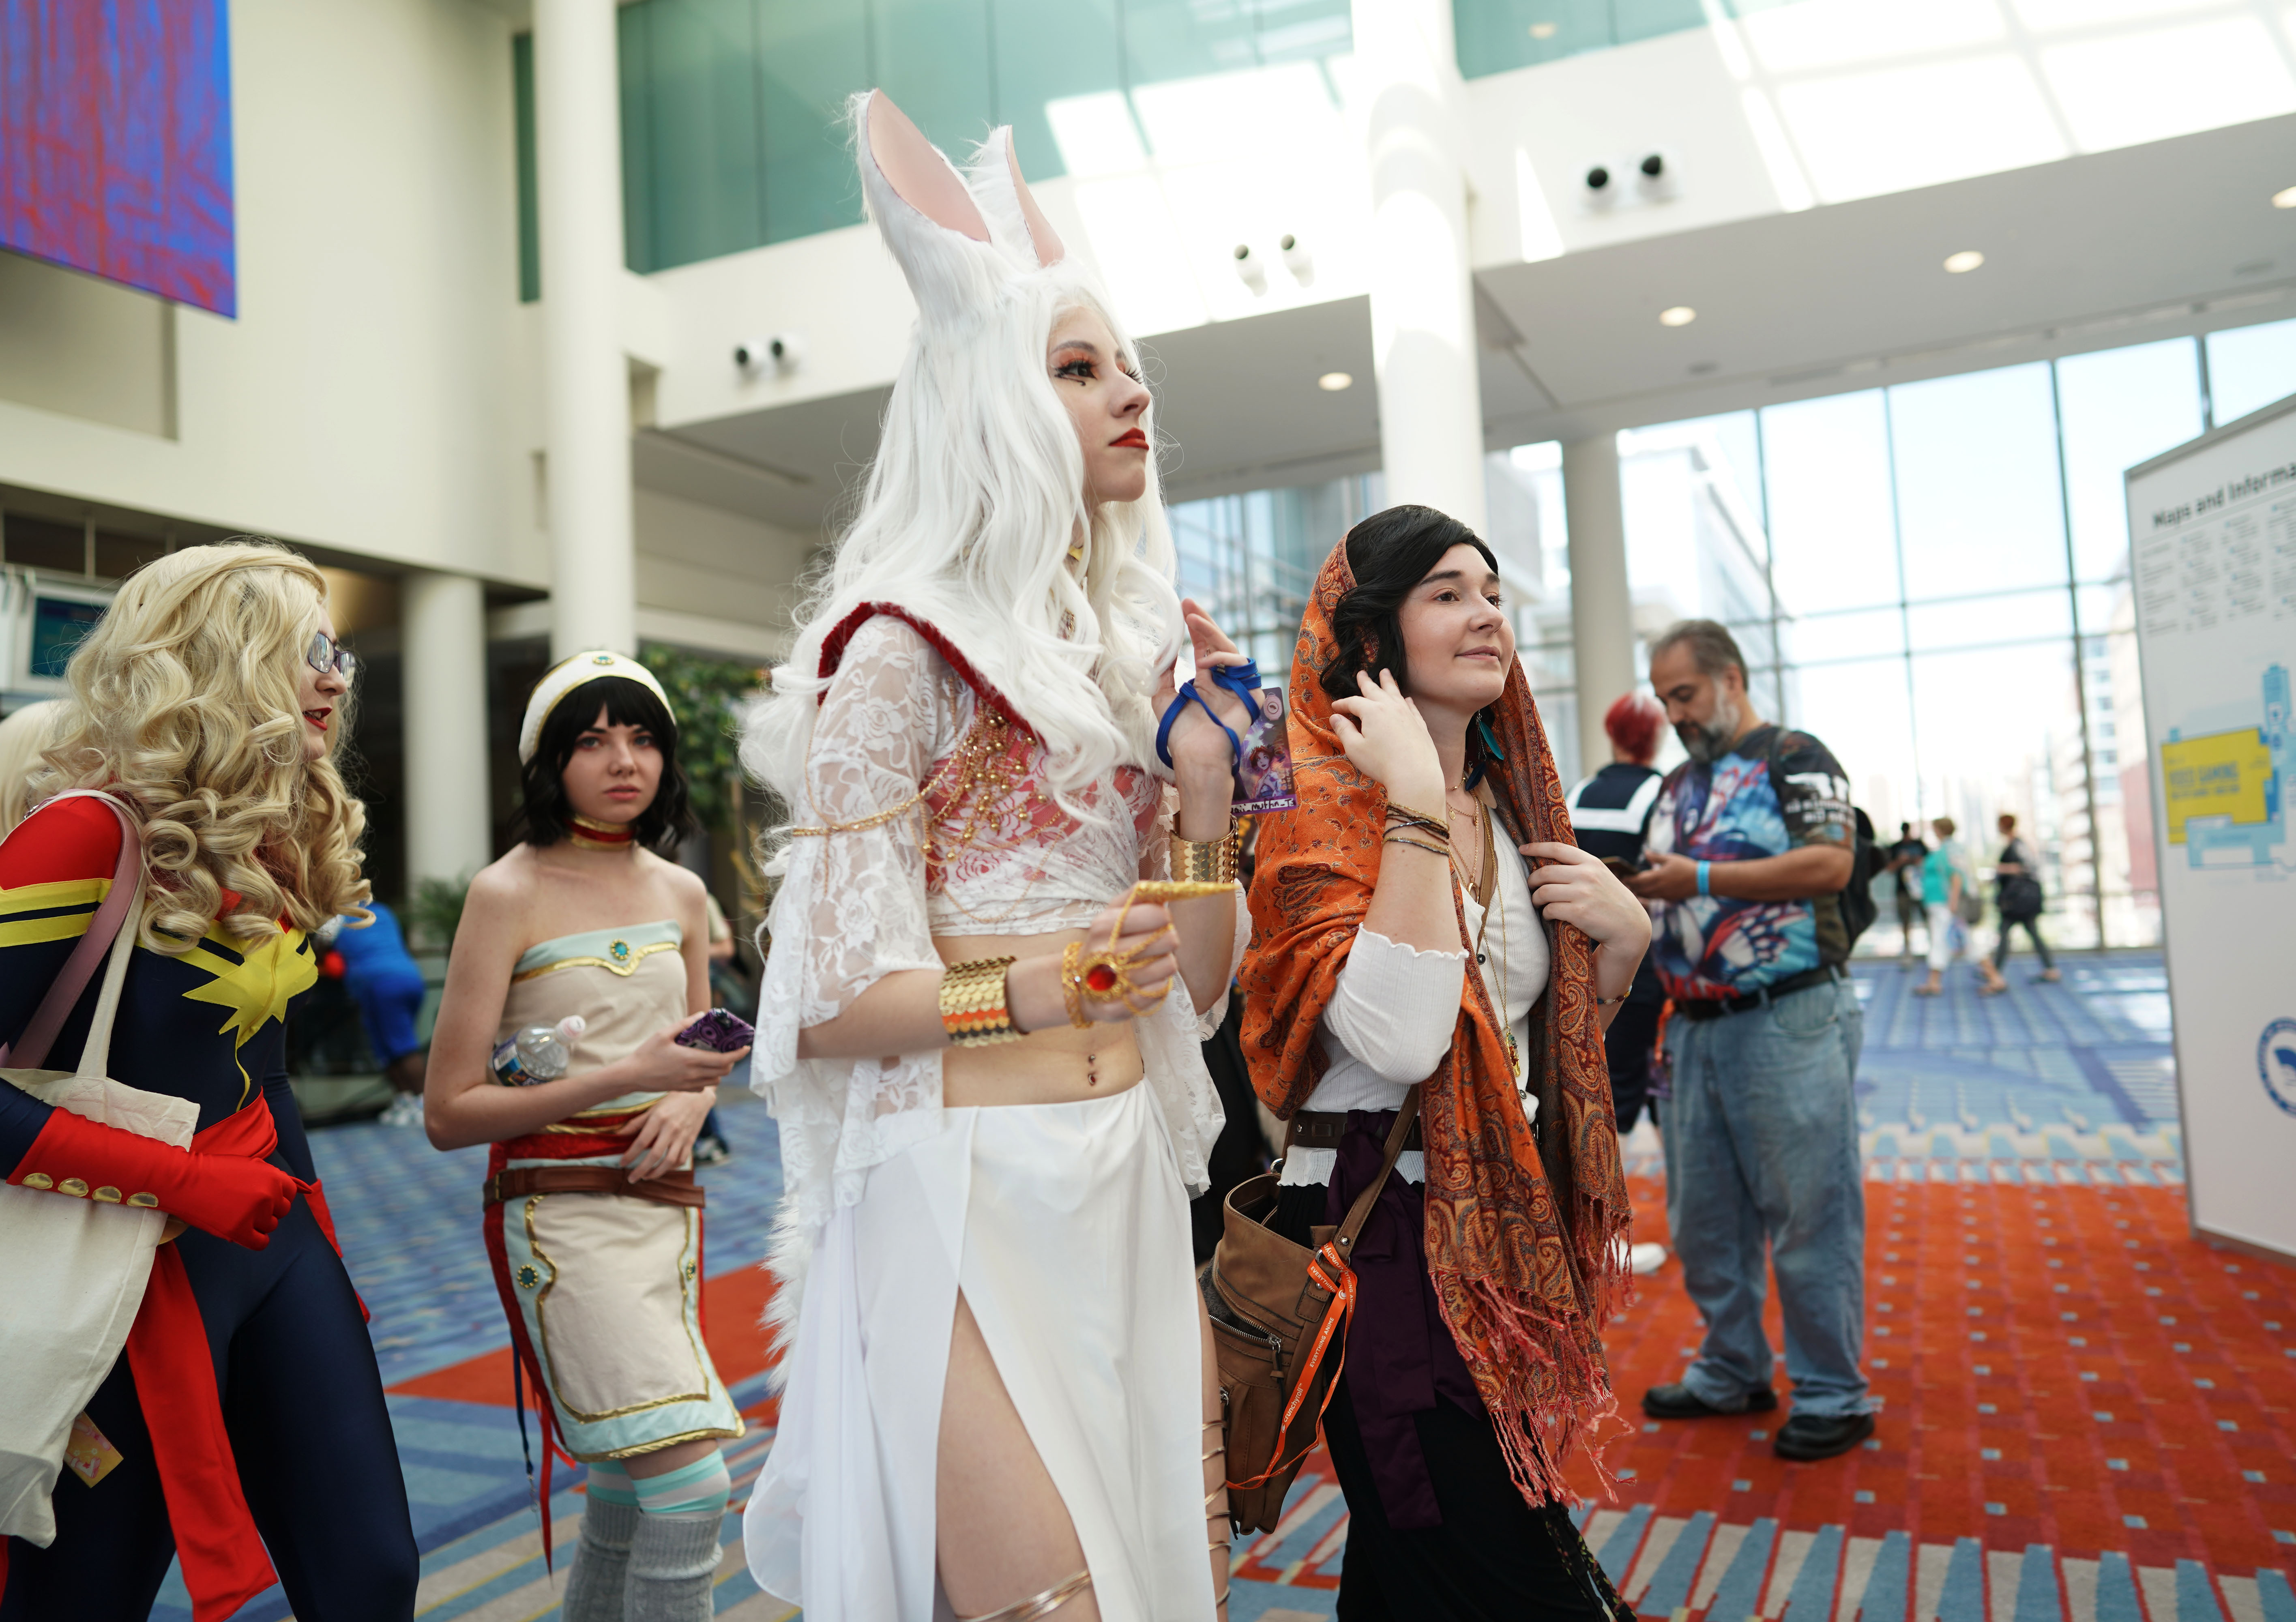 Anime Conventions Changed Culture Forever. COVID Could End Them